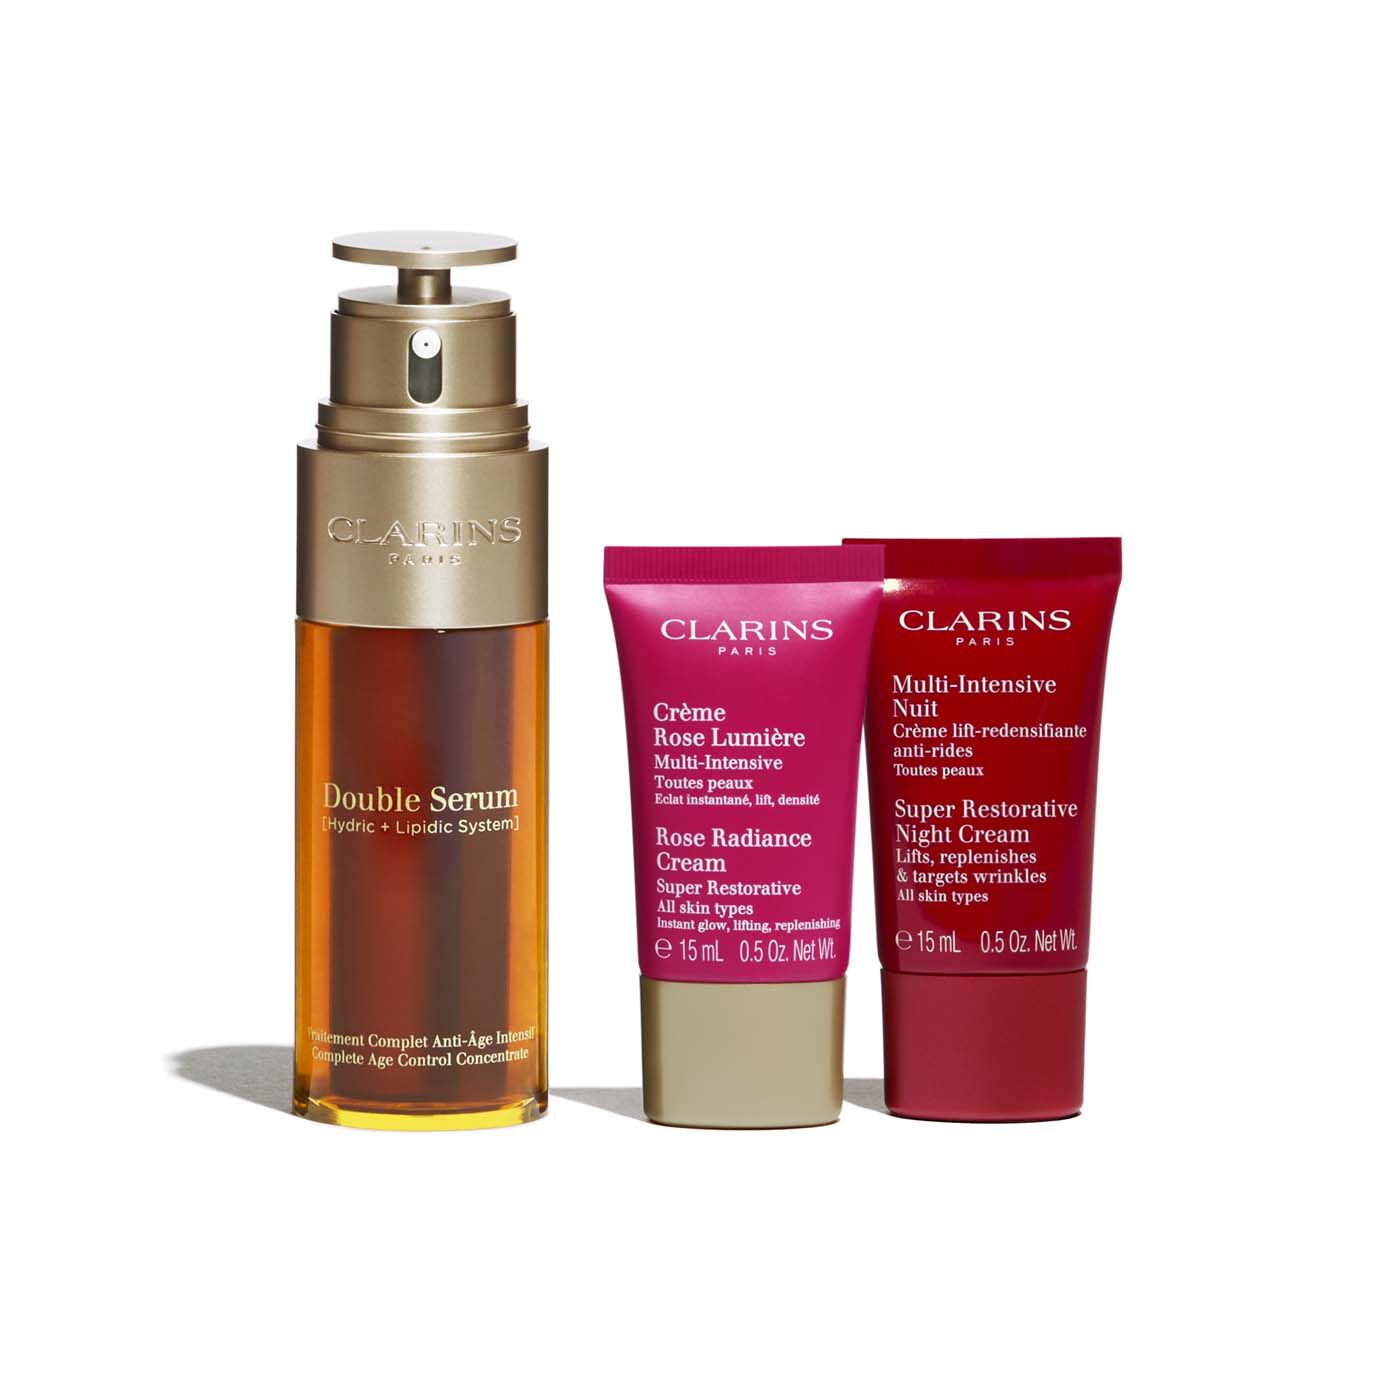 Double Serum and Super Restorative Collection Set